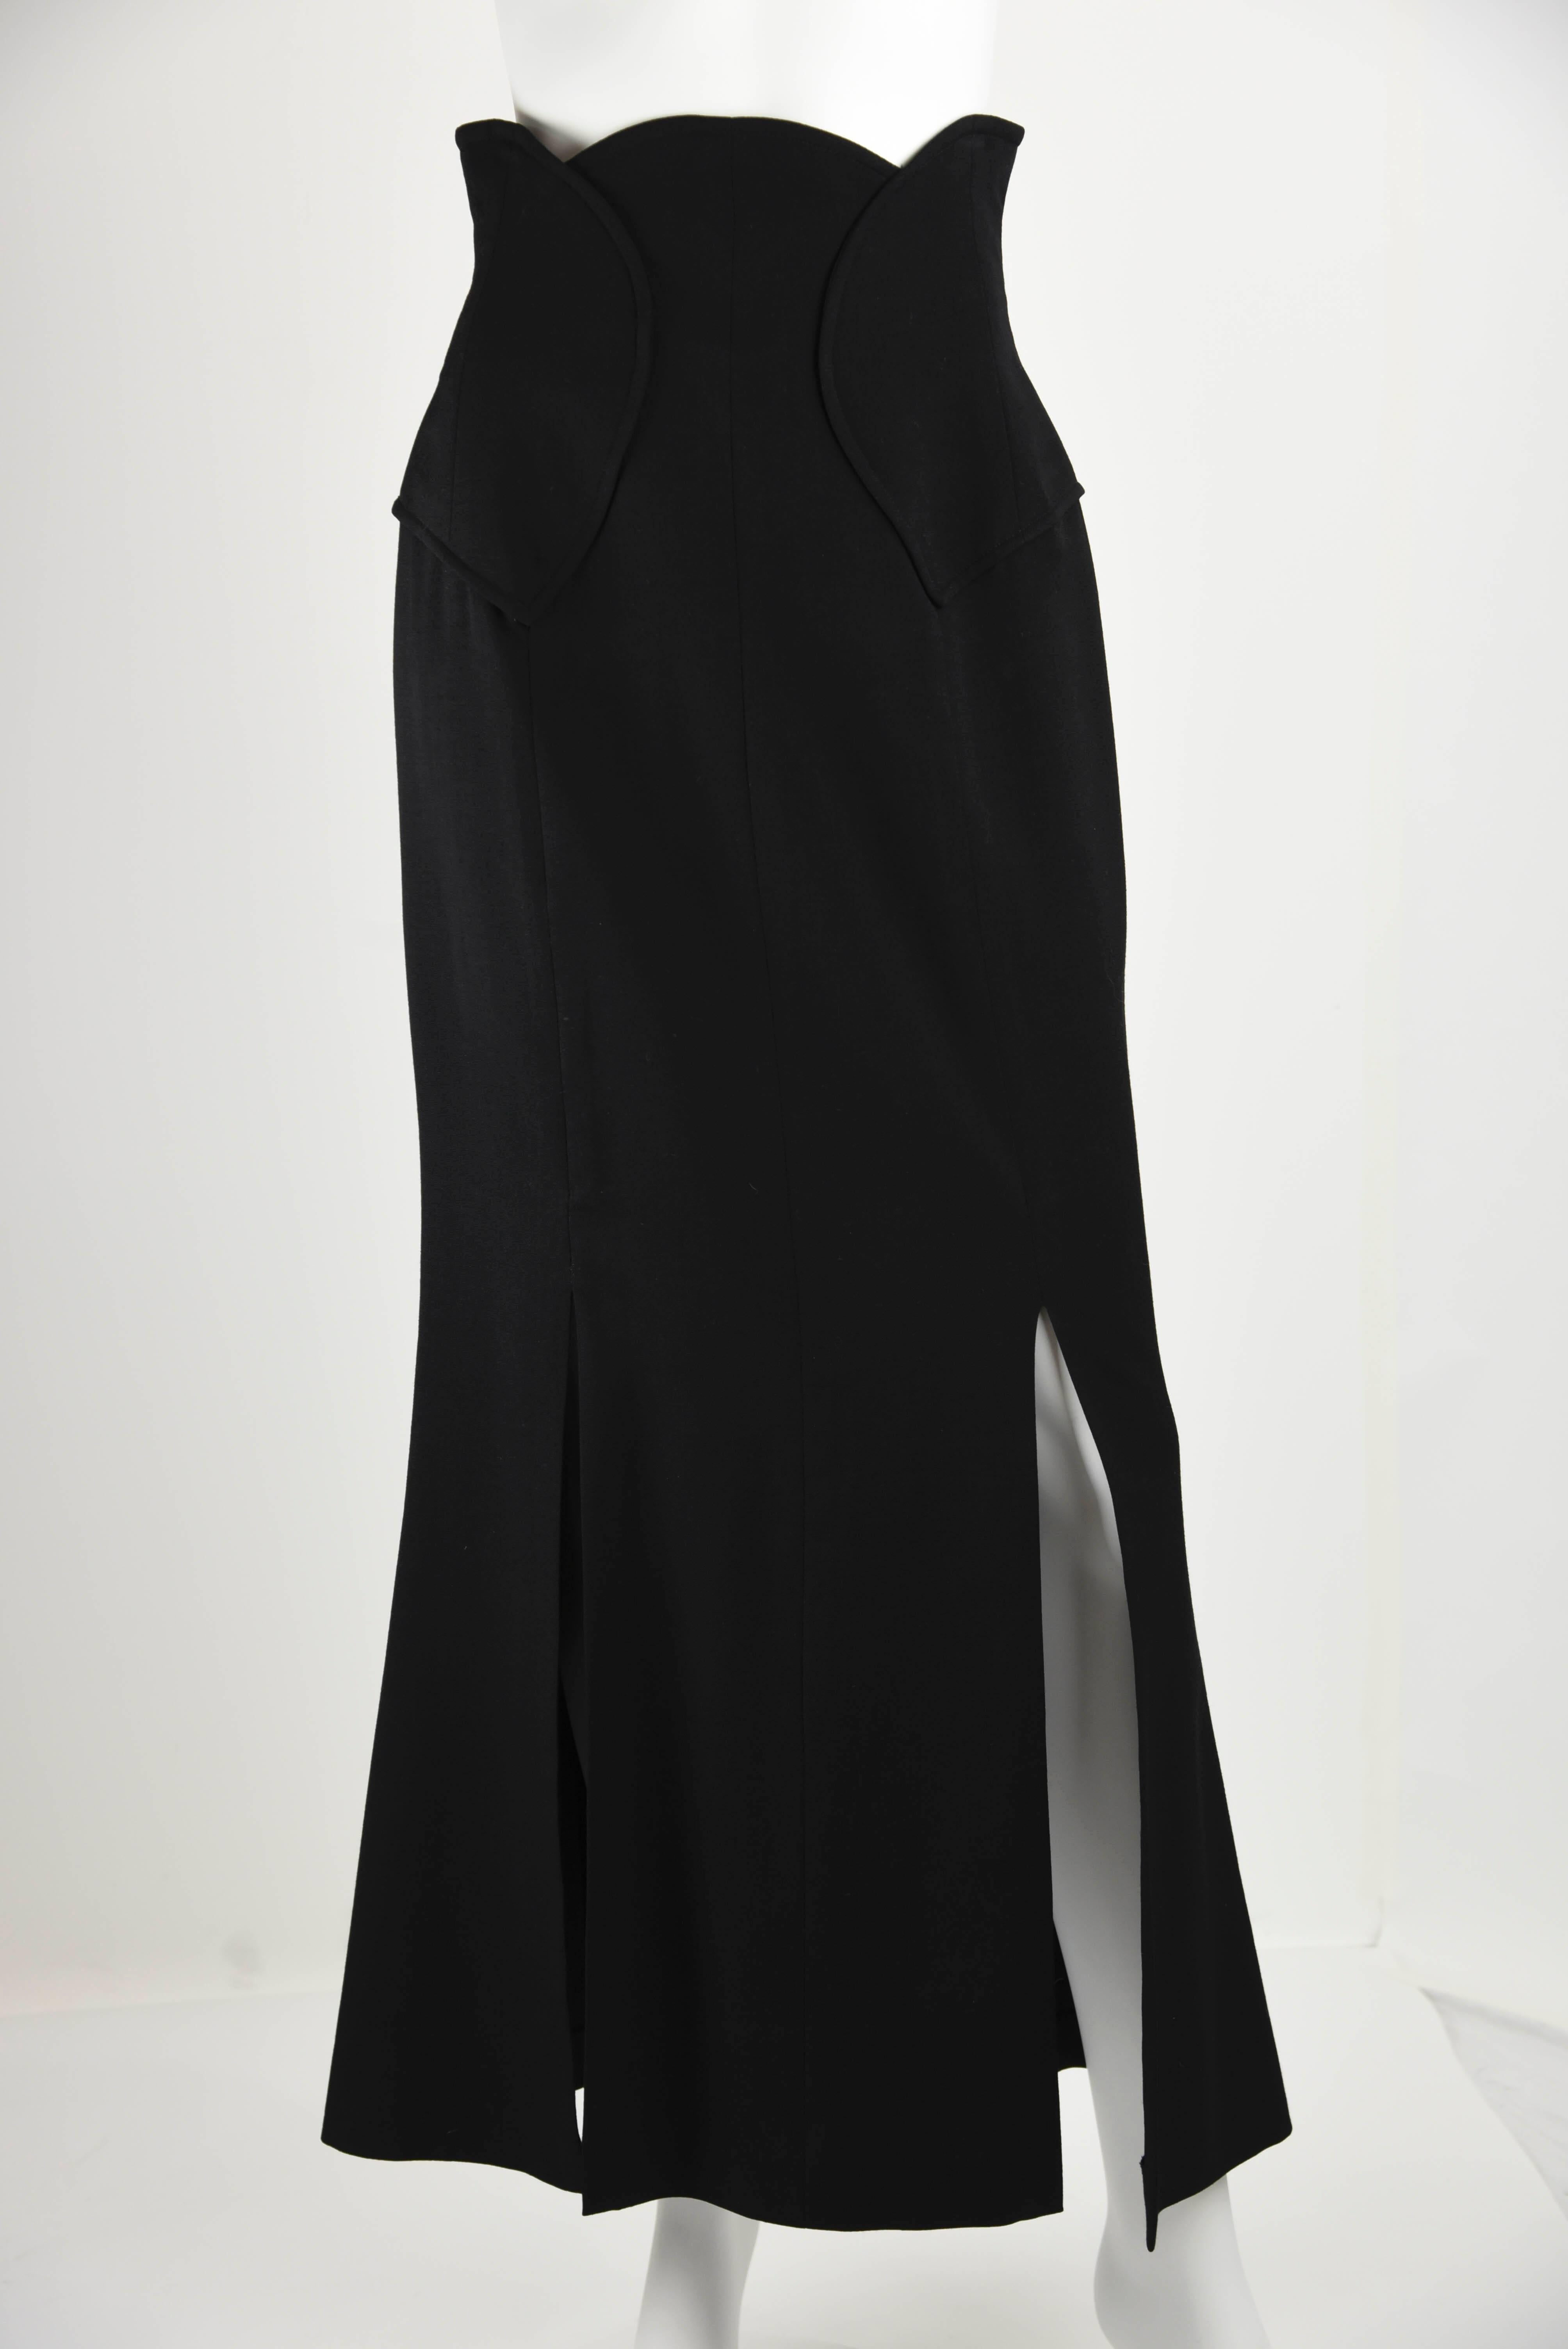 Chanel Boutique 1980's Long Black Skirt With Front Slits and Waist Detail FR 40 For Sale 3